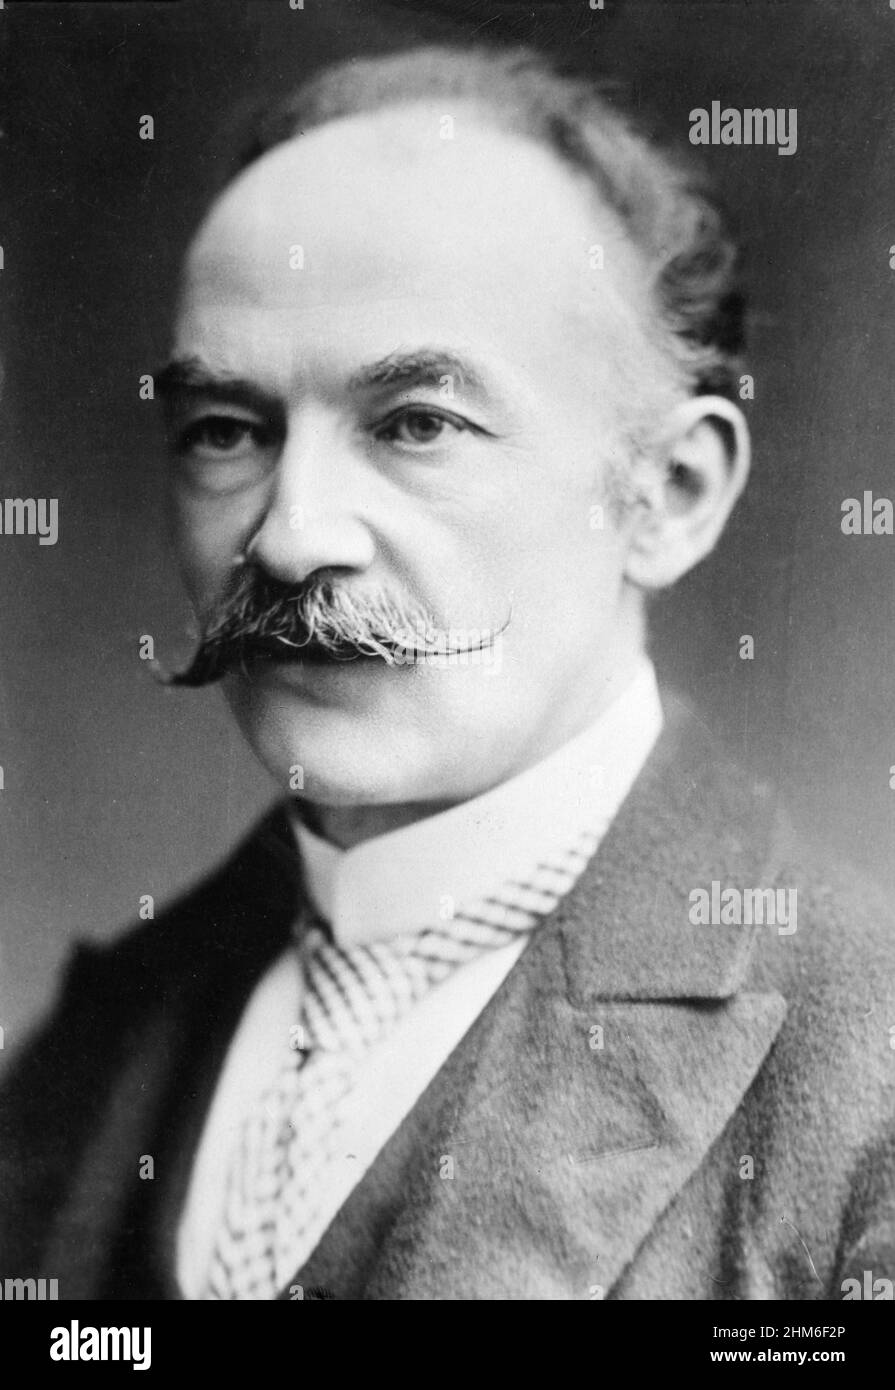 A portrait of the English writer Thomas Hardy, author of Tess of the D'urbervilles and The Mayor of Casterbridge, Stock Photo